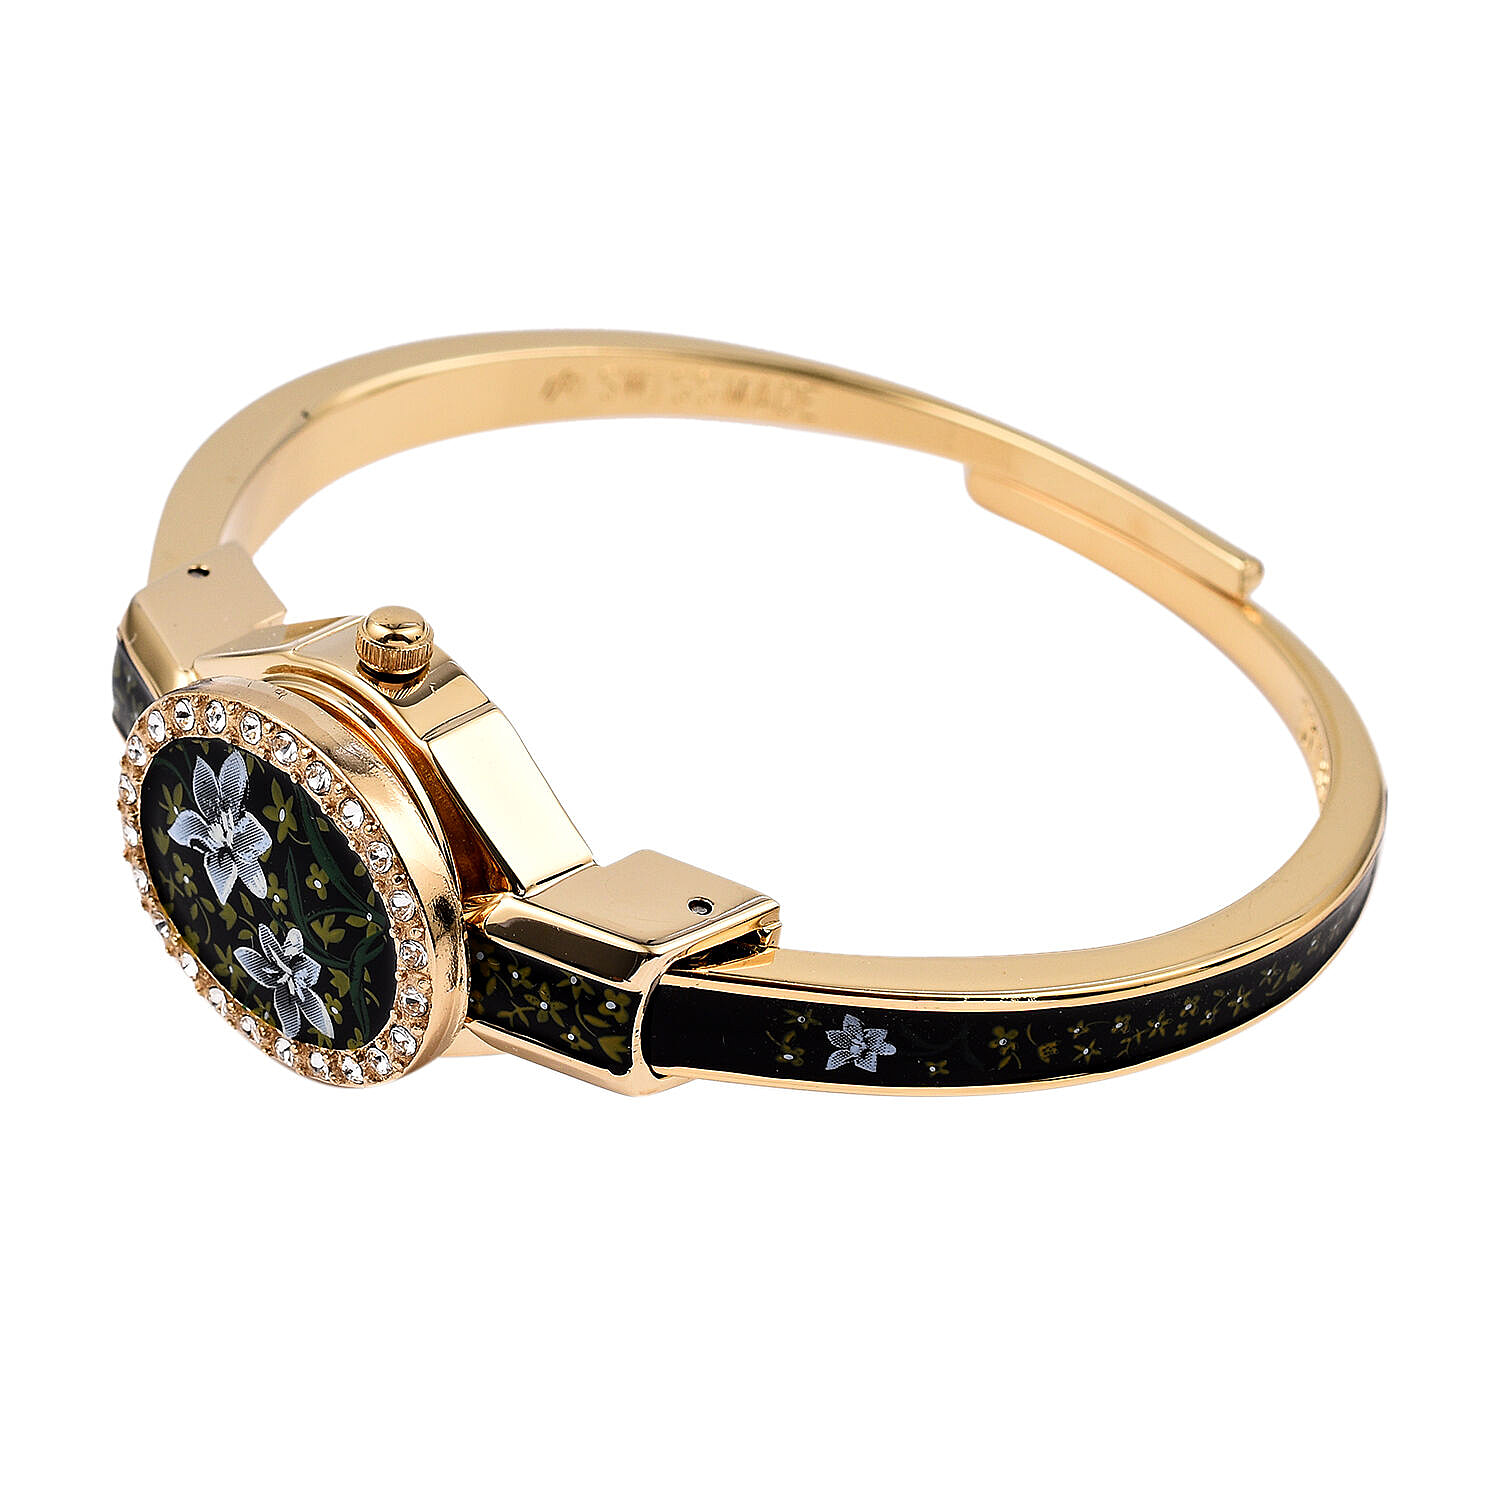 Andre Mouche Swiss Ronda Movement White Floral Pattern 18ct Gold Plated  Ladies Bangle Watch (Size 6 - 6.5)